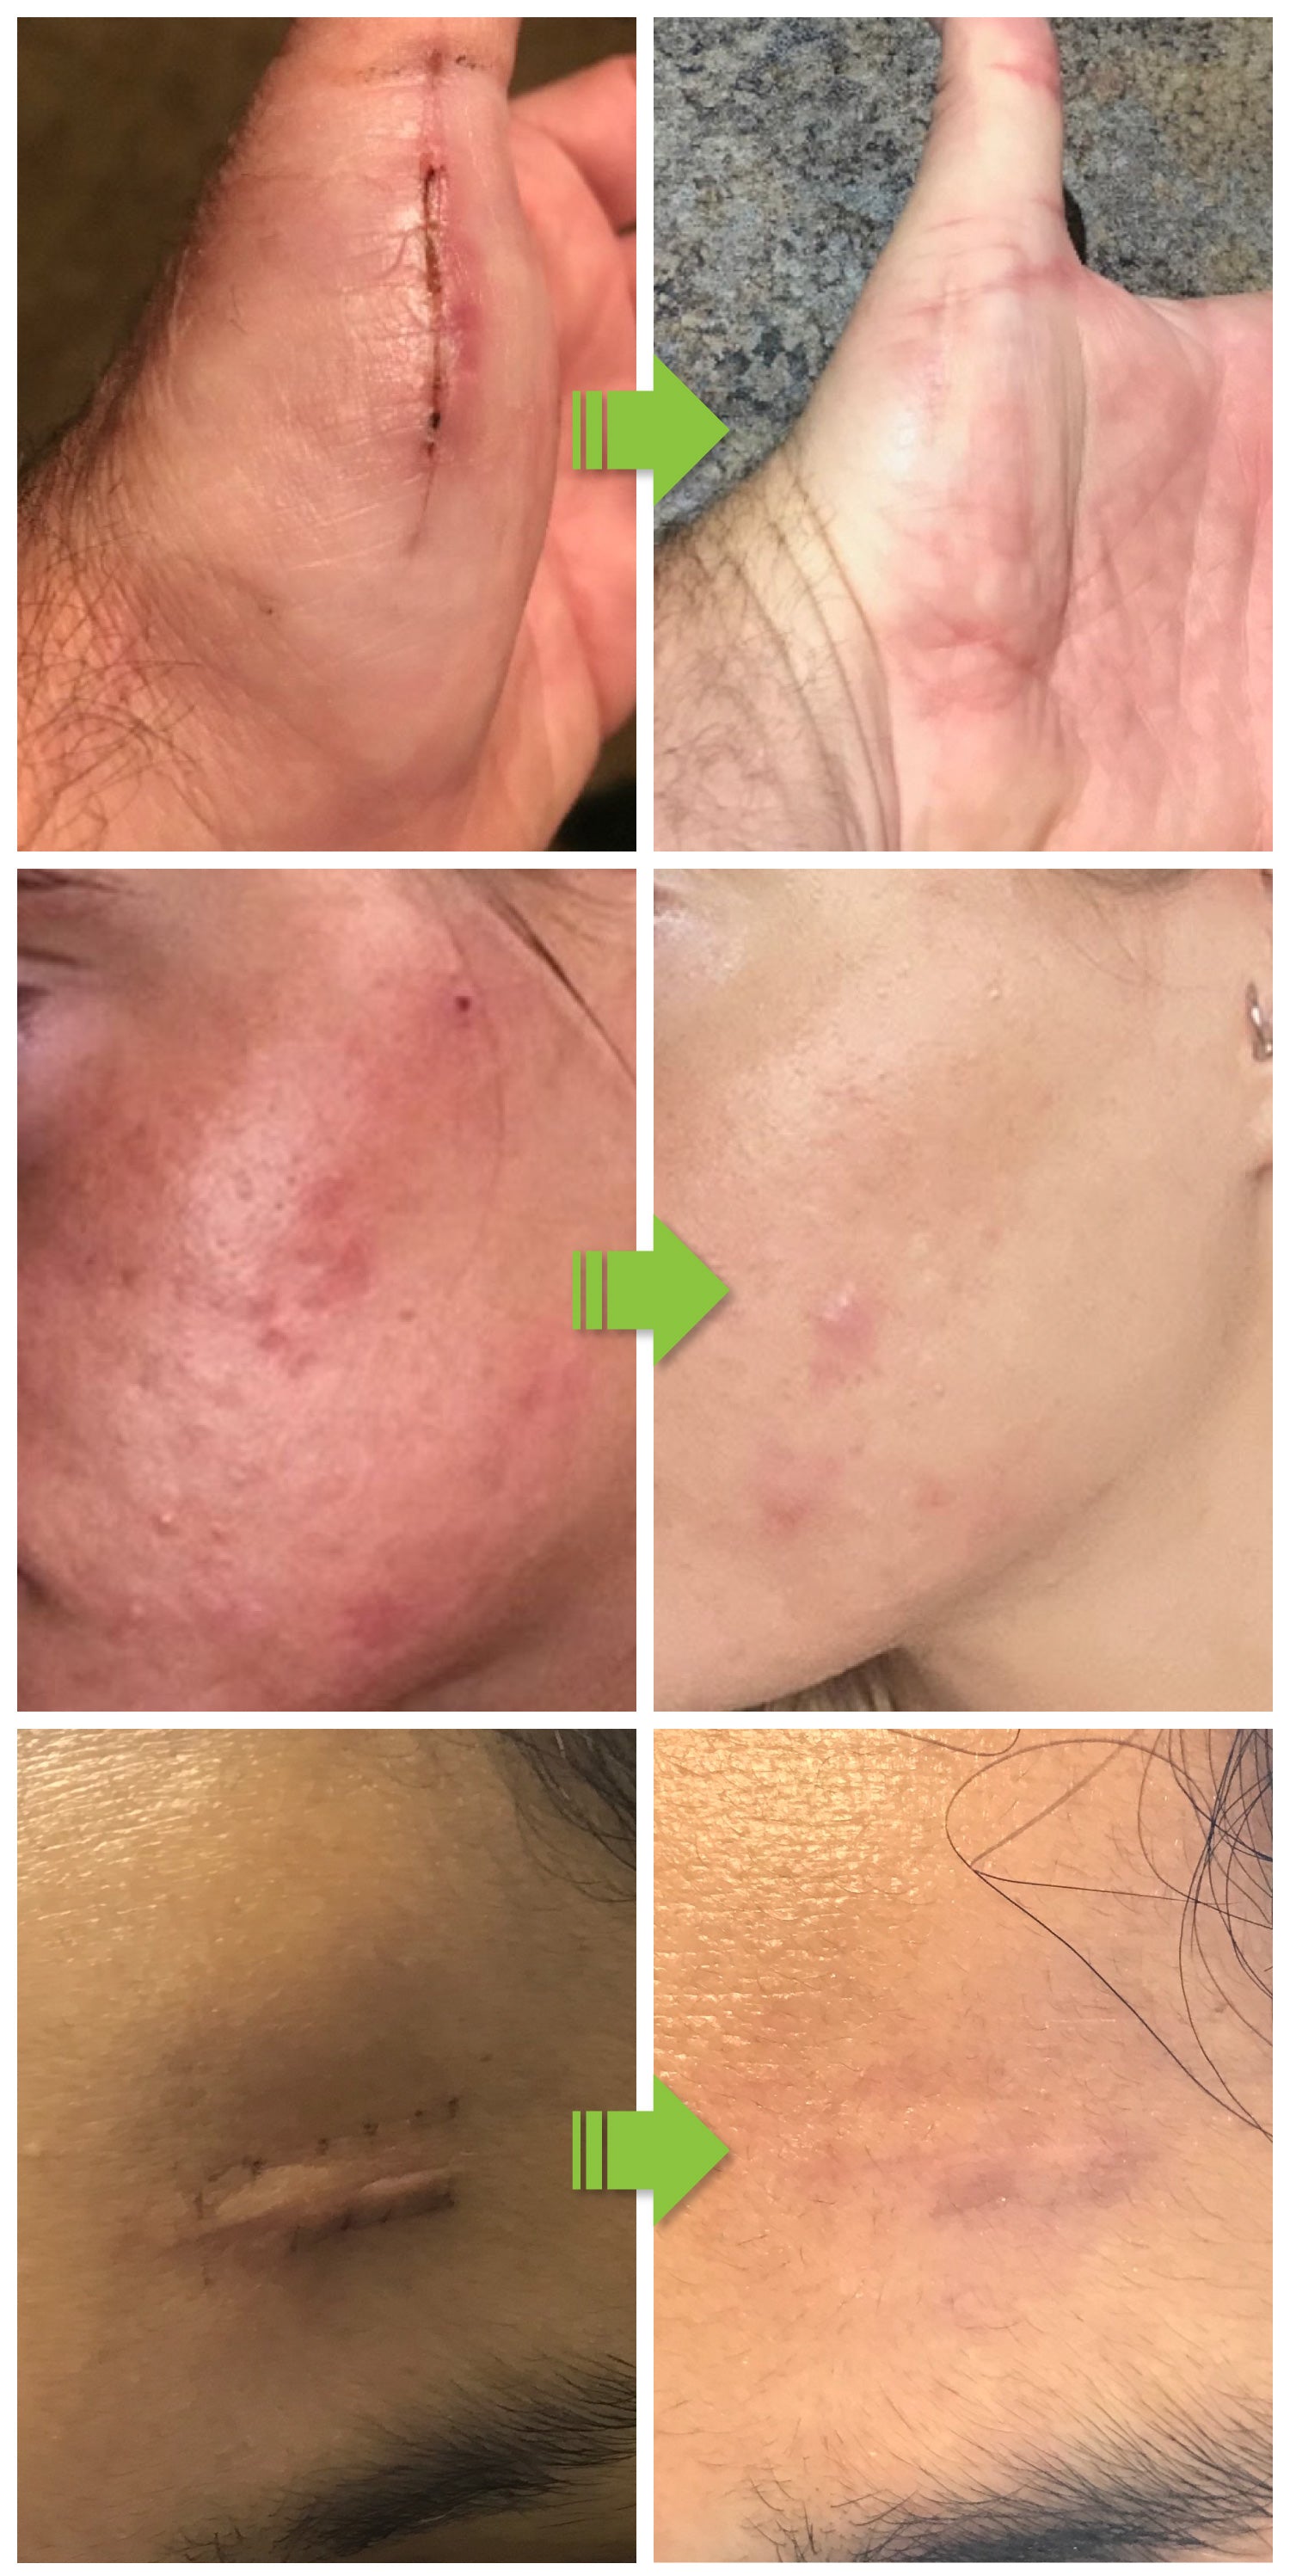 Before and After Images from using Derminish Scar Wipes